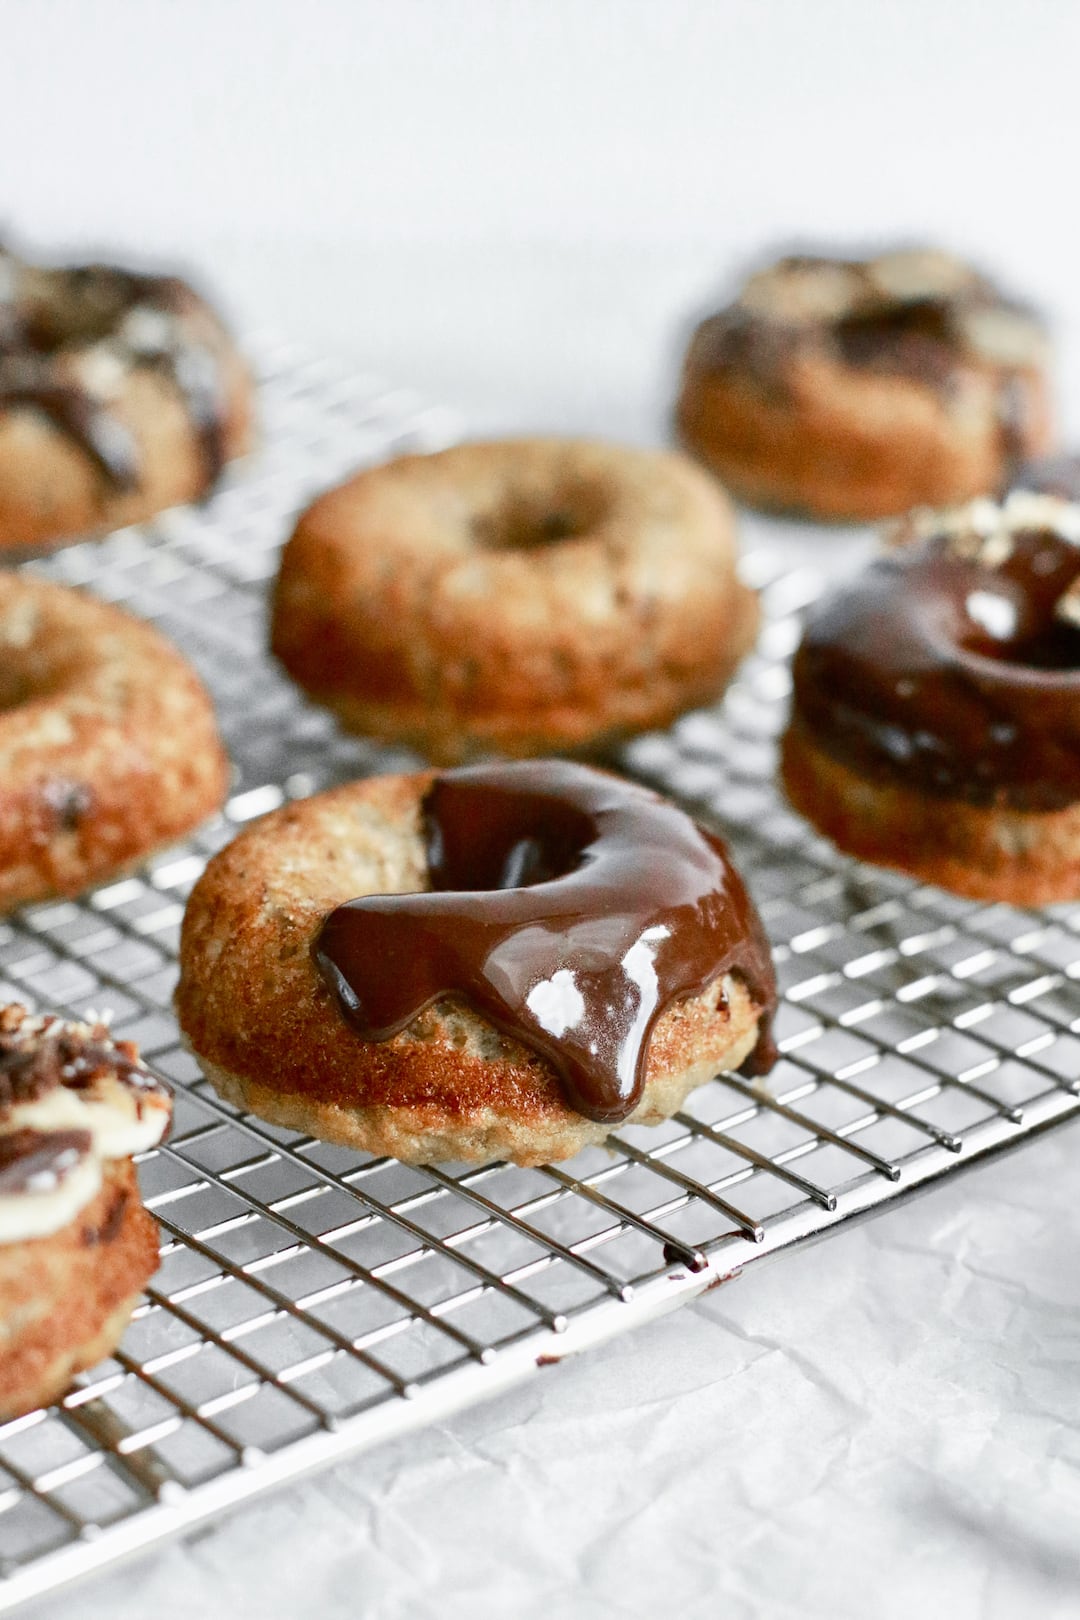 Naturally sweetened chocolate glaze pouring over a healthy banana bread donut